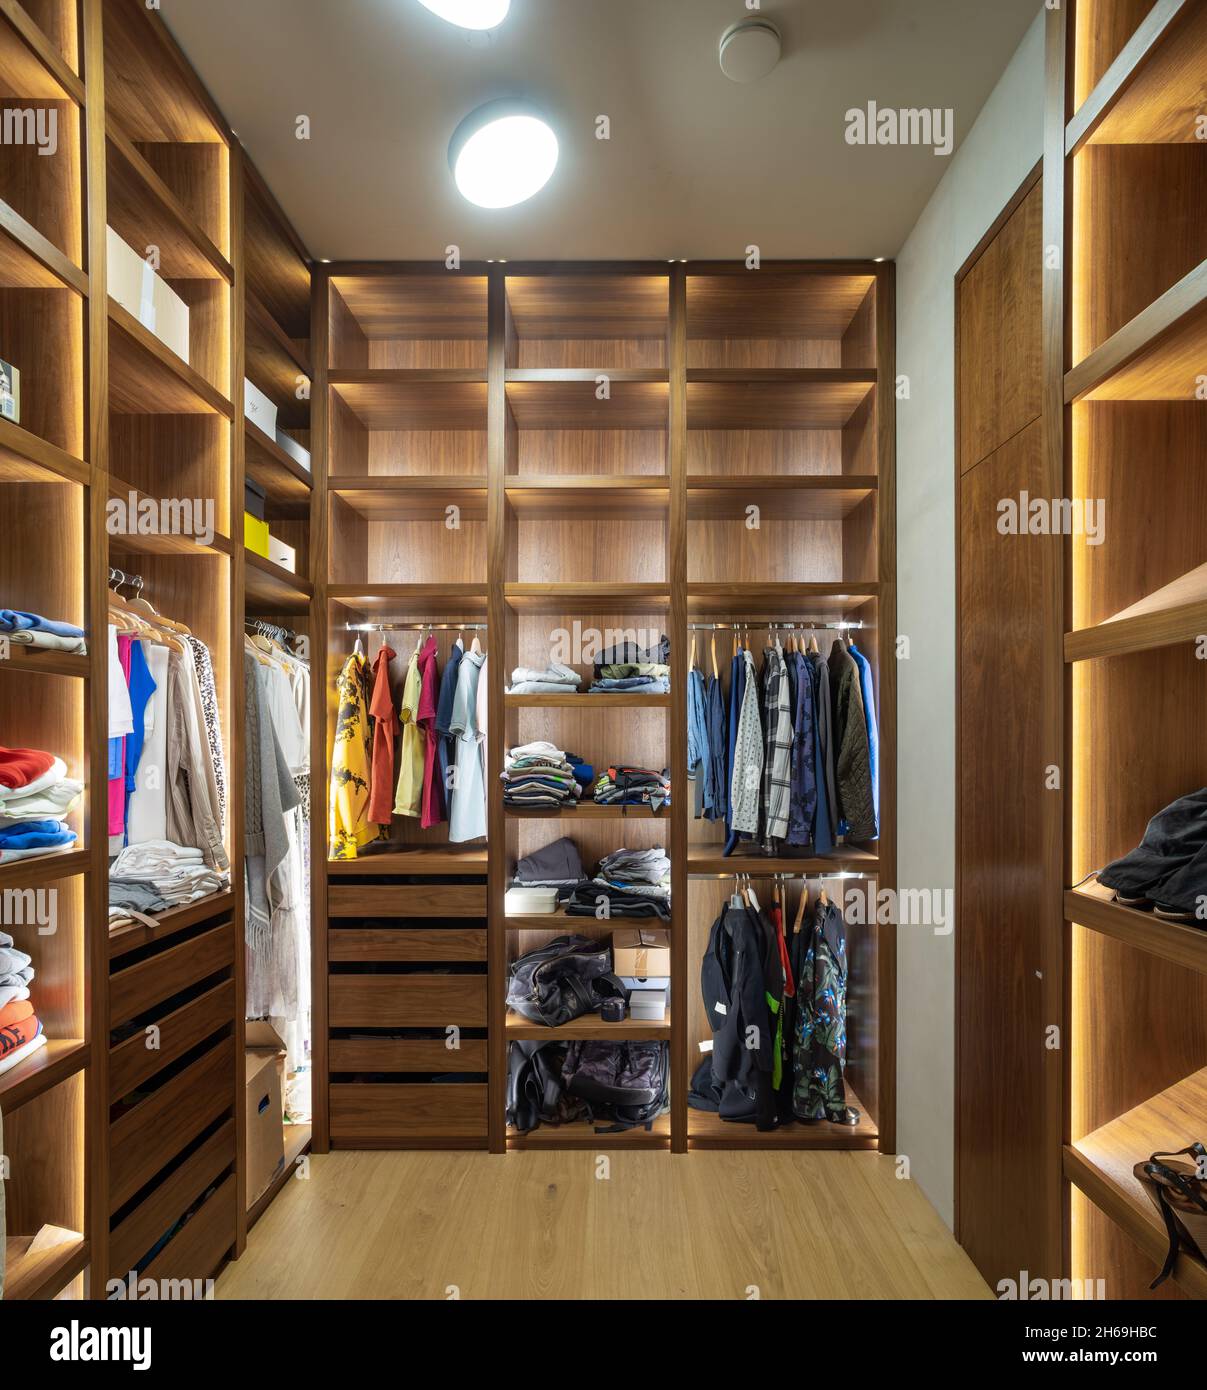 Modern interior of dressing room in luxury apartment. Illuminated wooden  shelves. Clothes on hangers Stock Photo - Alamy